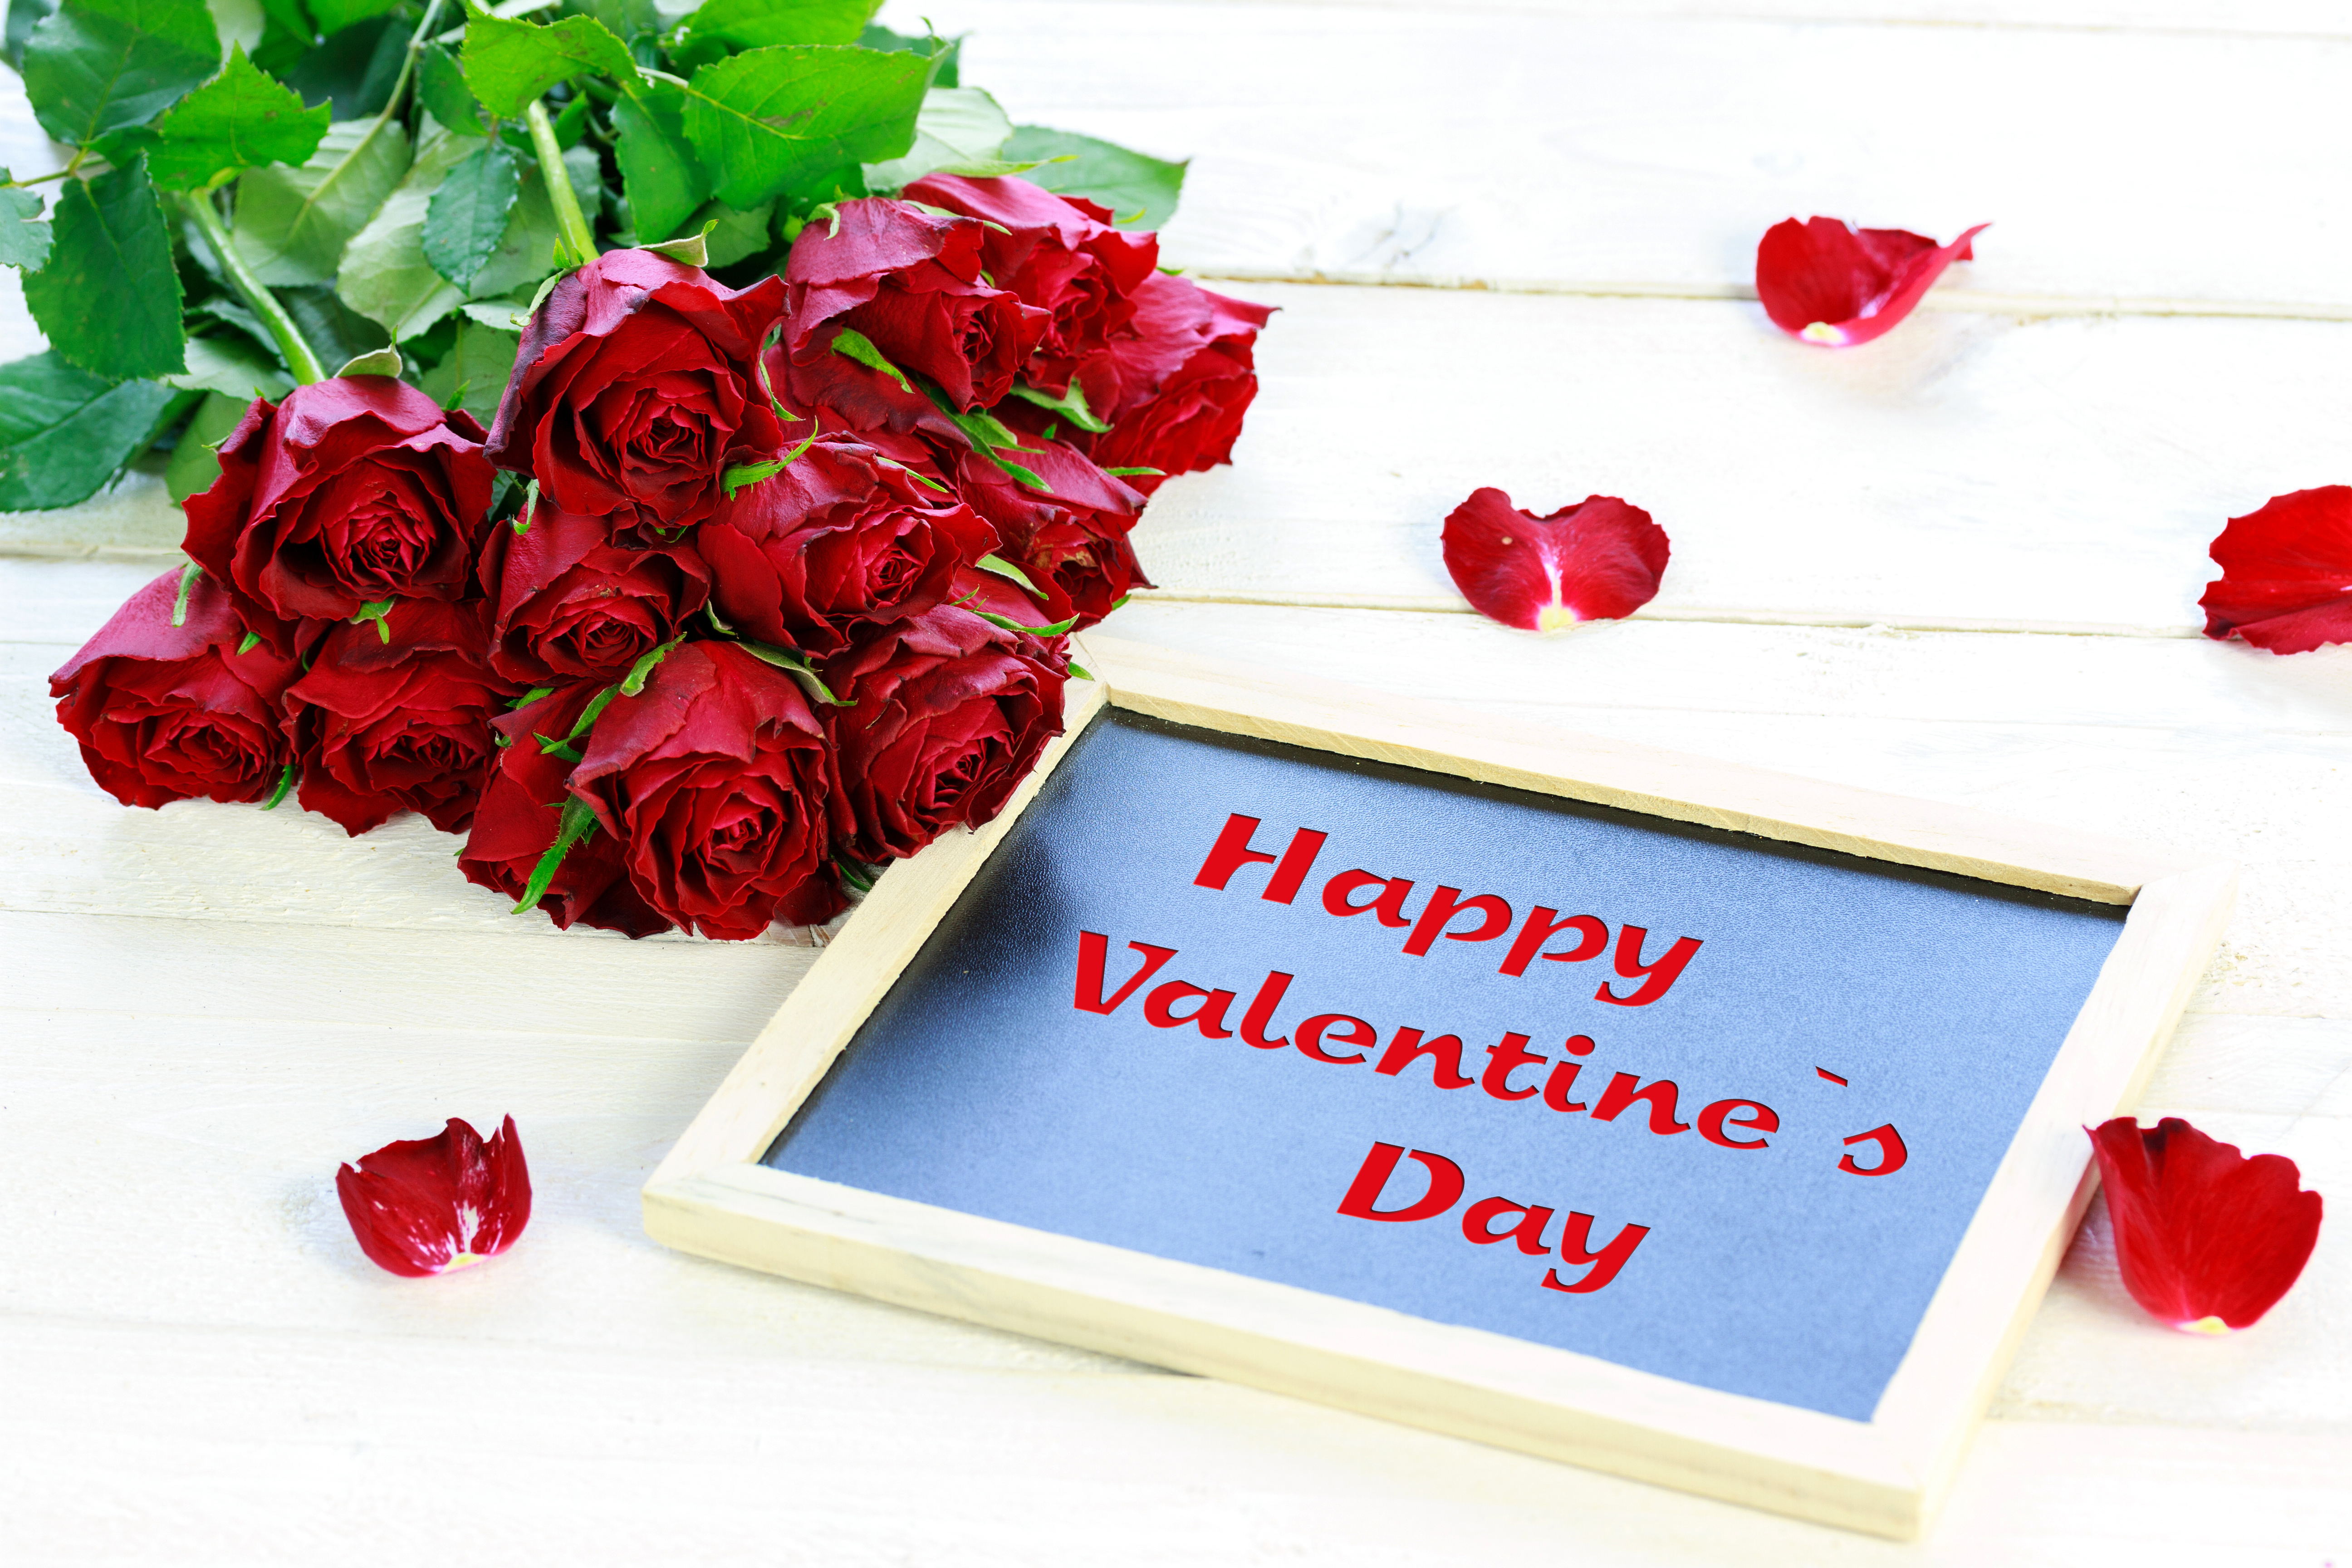 valentine's day, red flower, happy valentine's day, holiday, flower, red rose, rose images